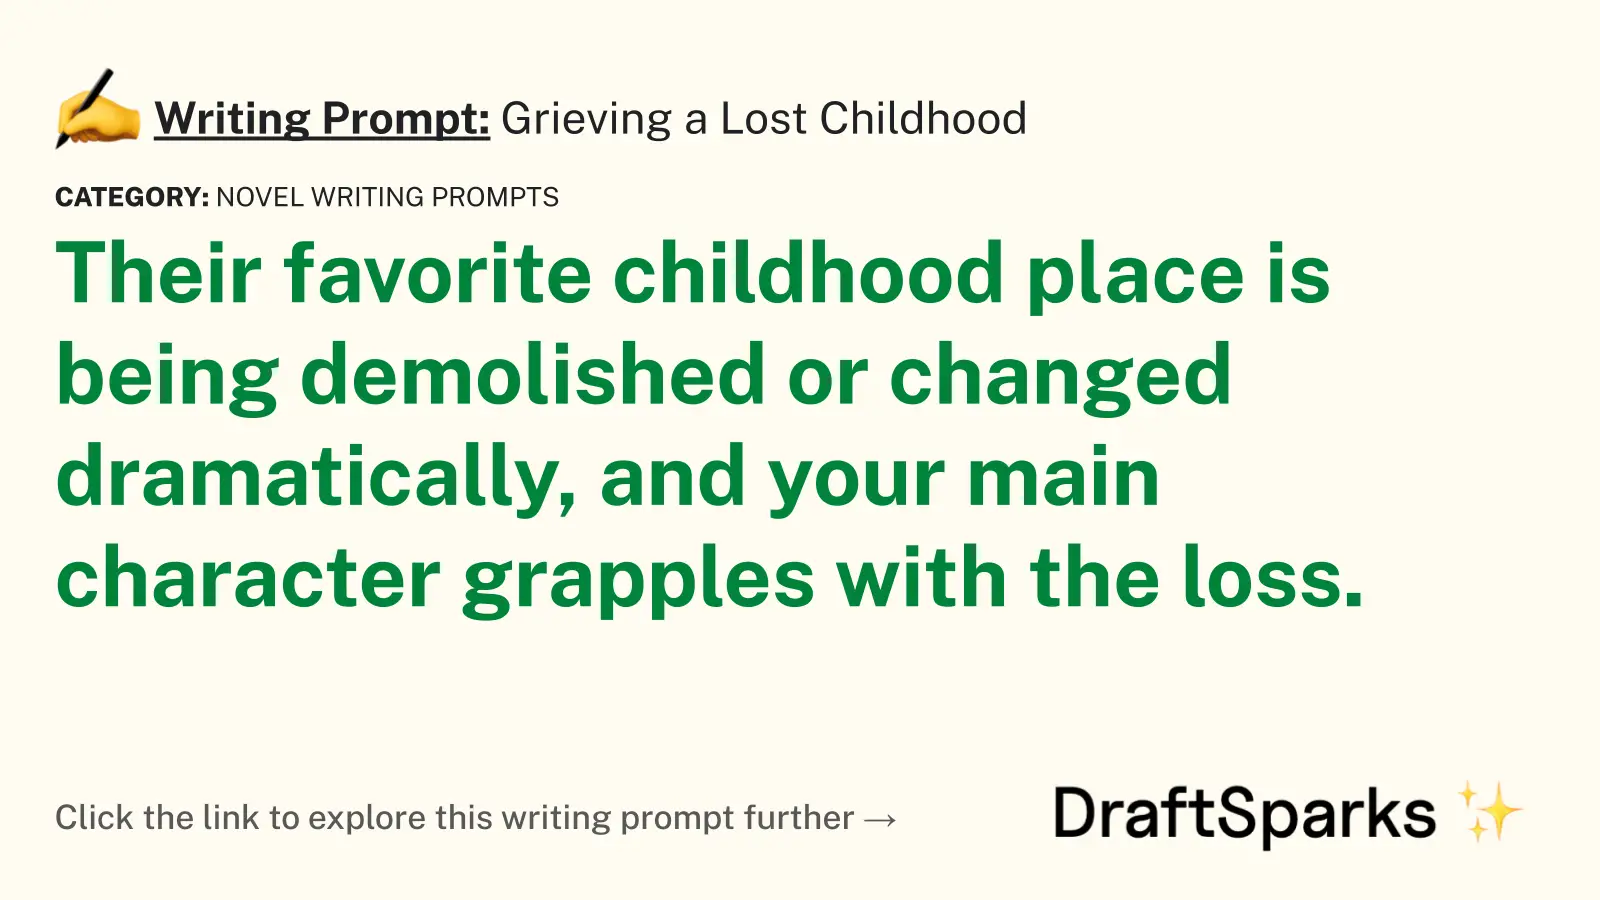 Grieving a Lost Childhood